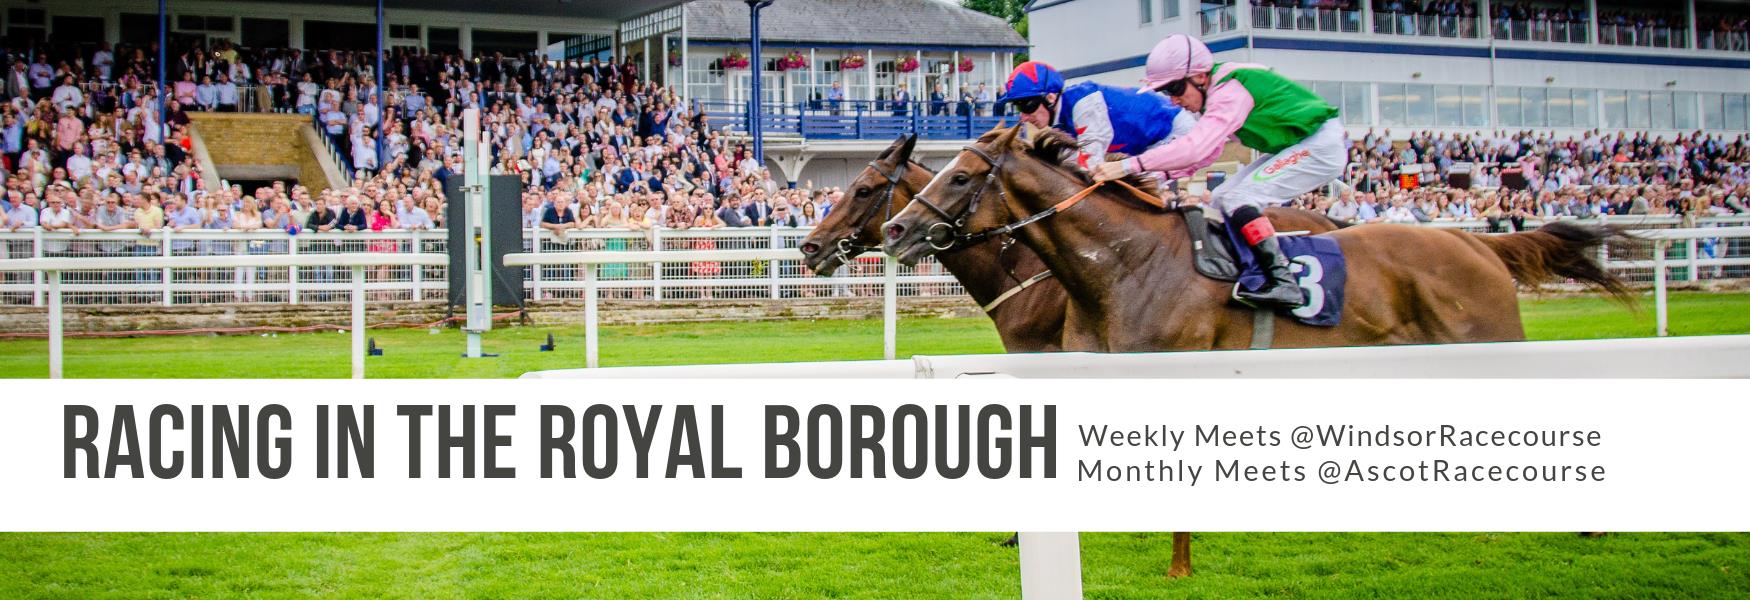 Book tickets for the Sport of Kings in the Royal Borough